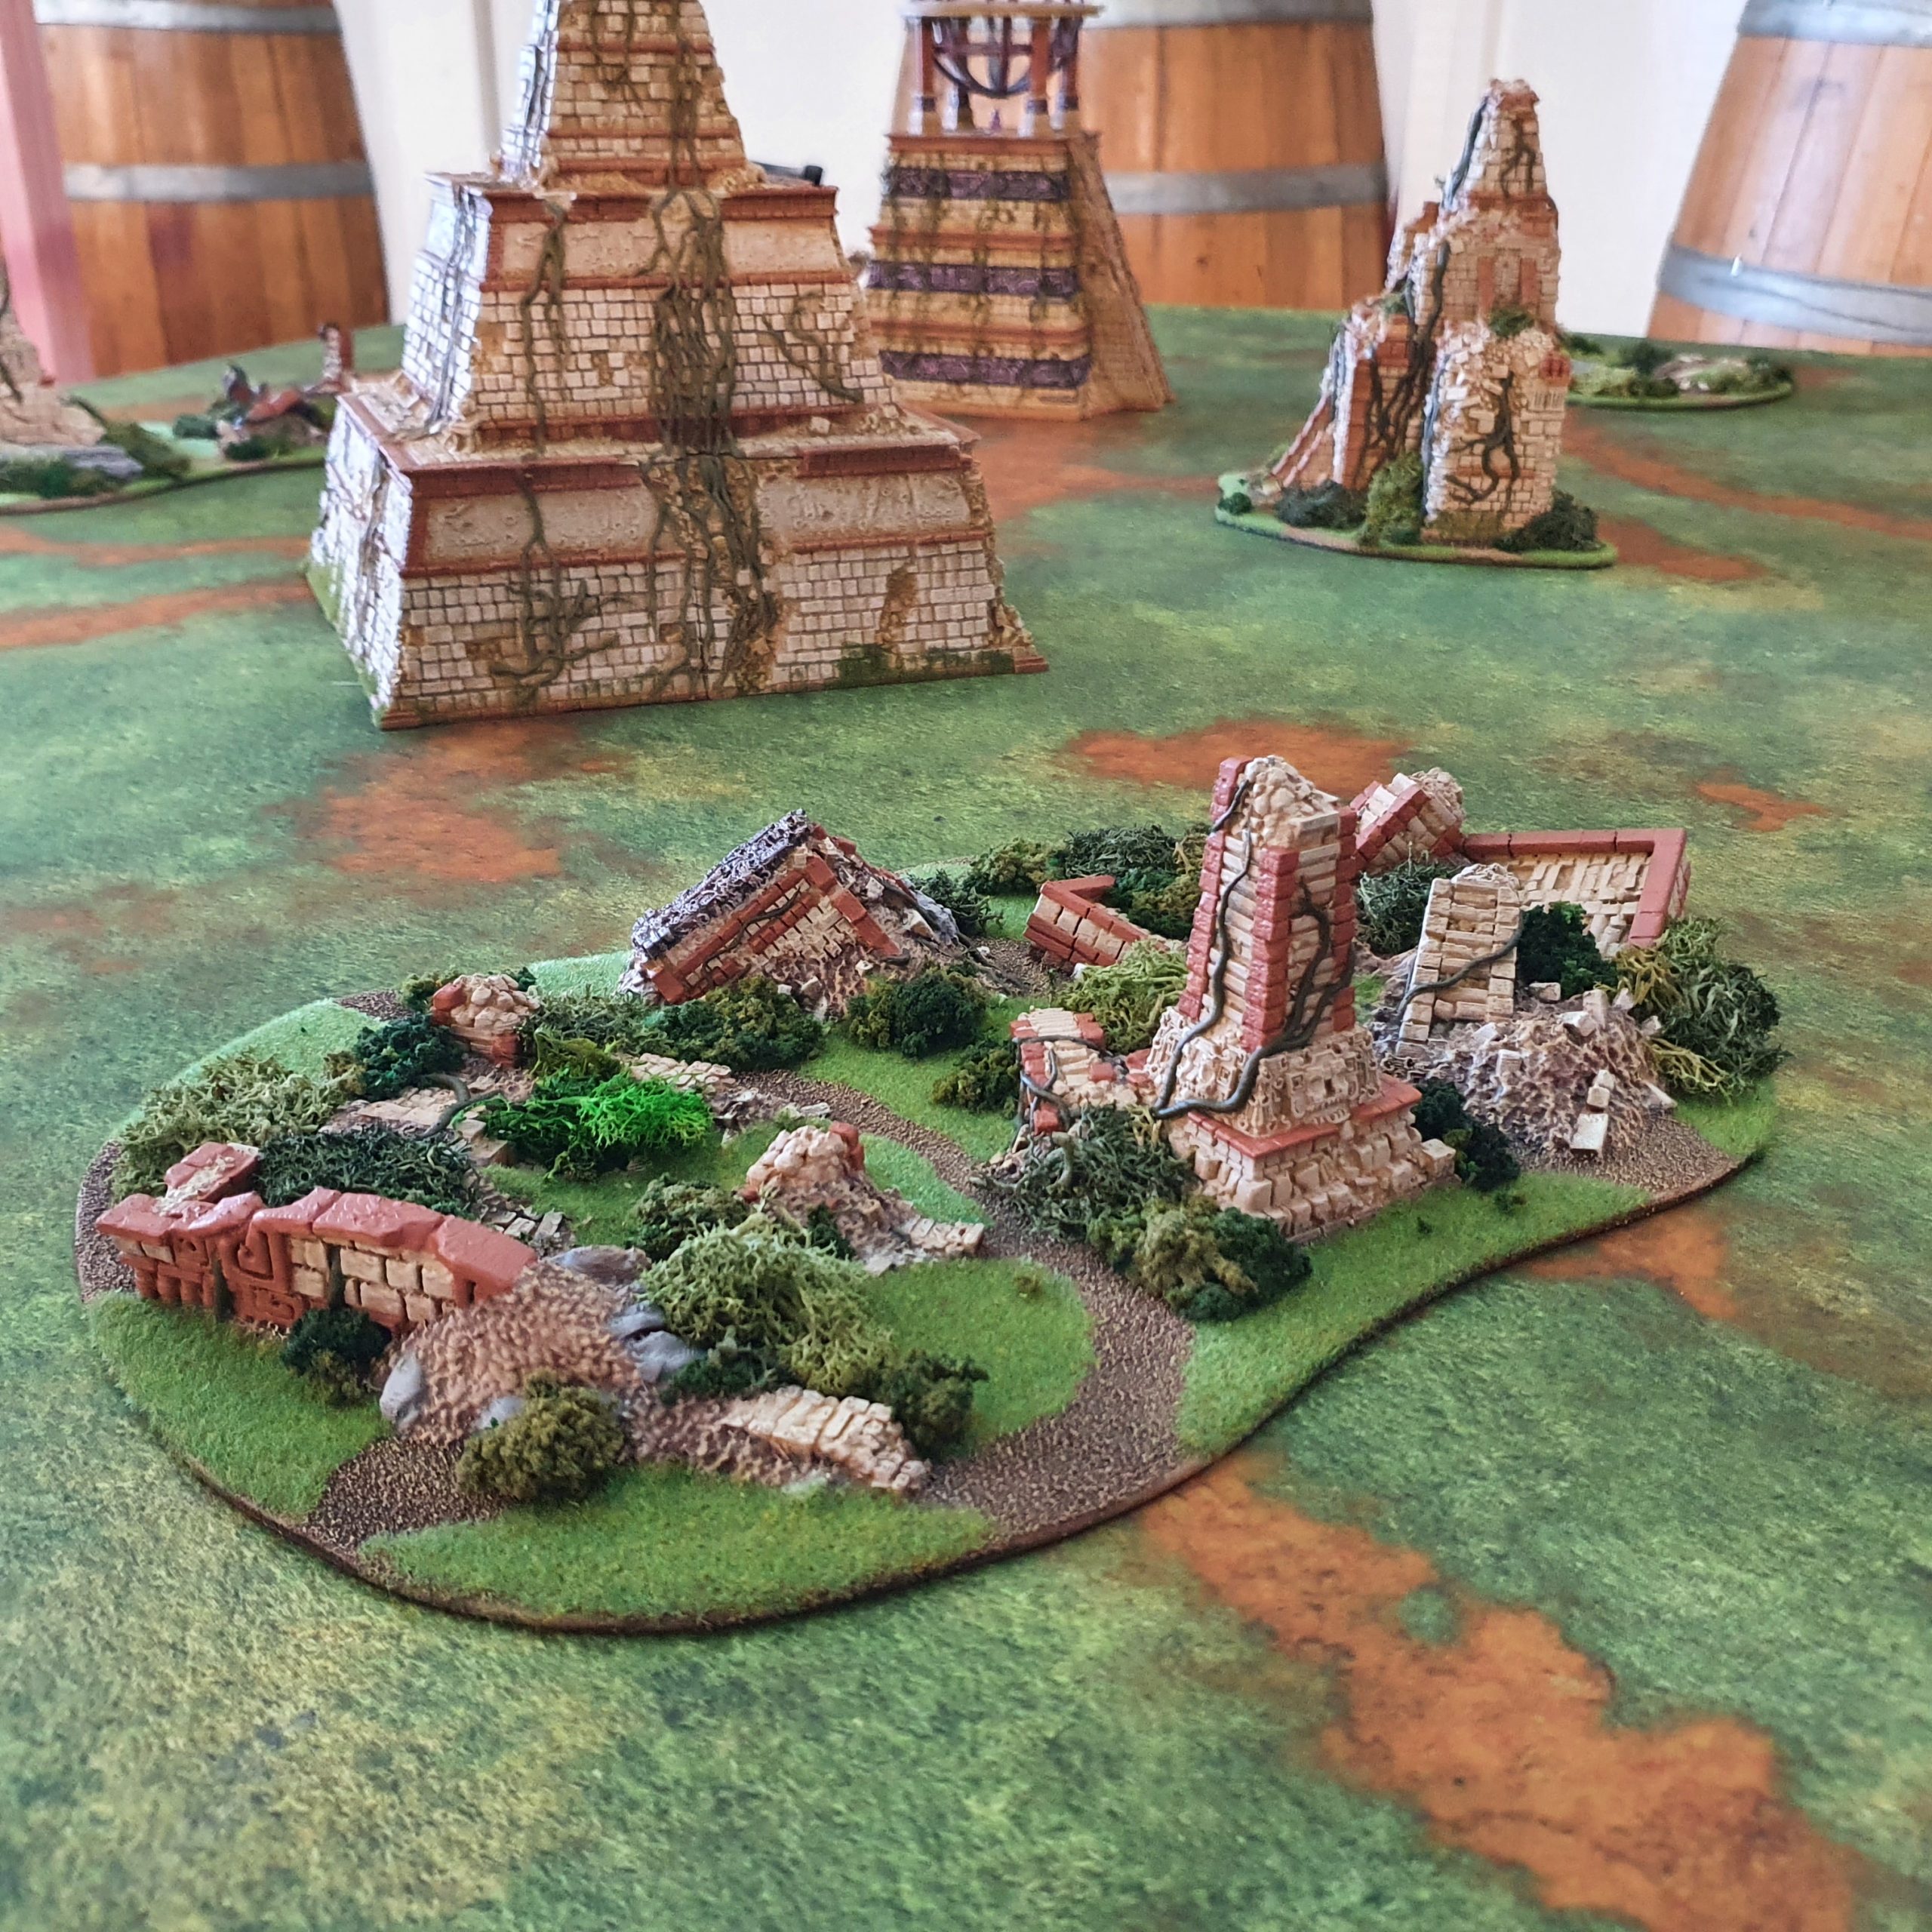 How to build terrain - Wargaming Hobby, Painting, Terrain, Images